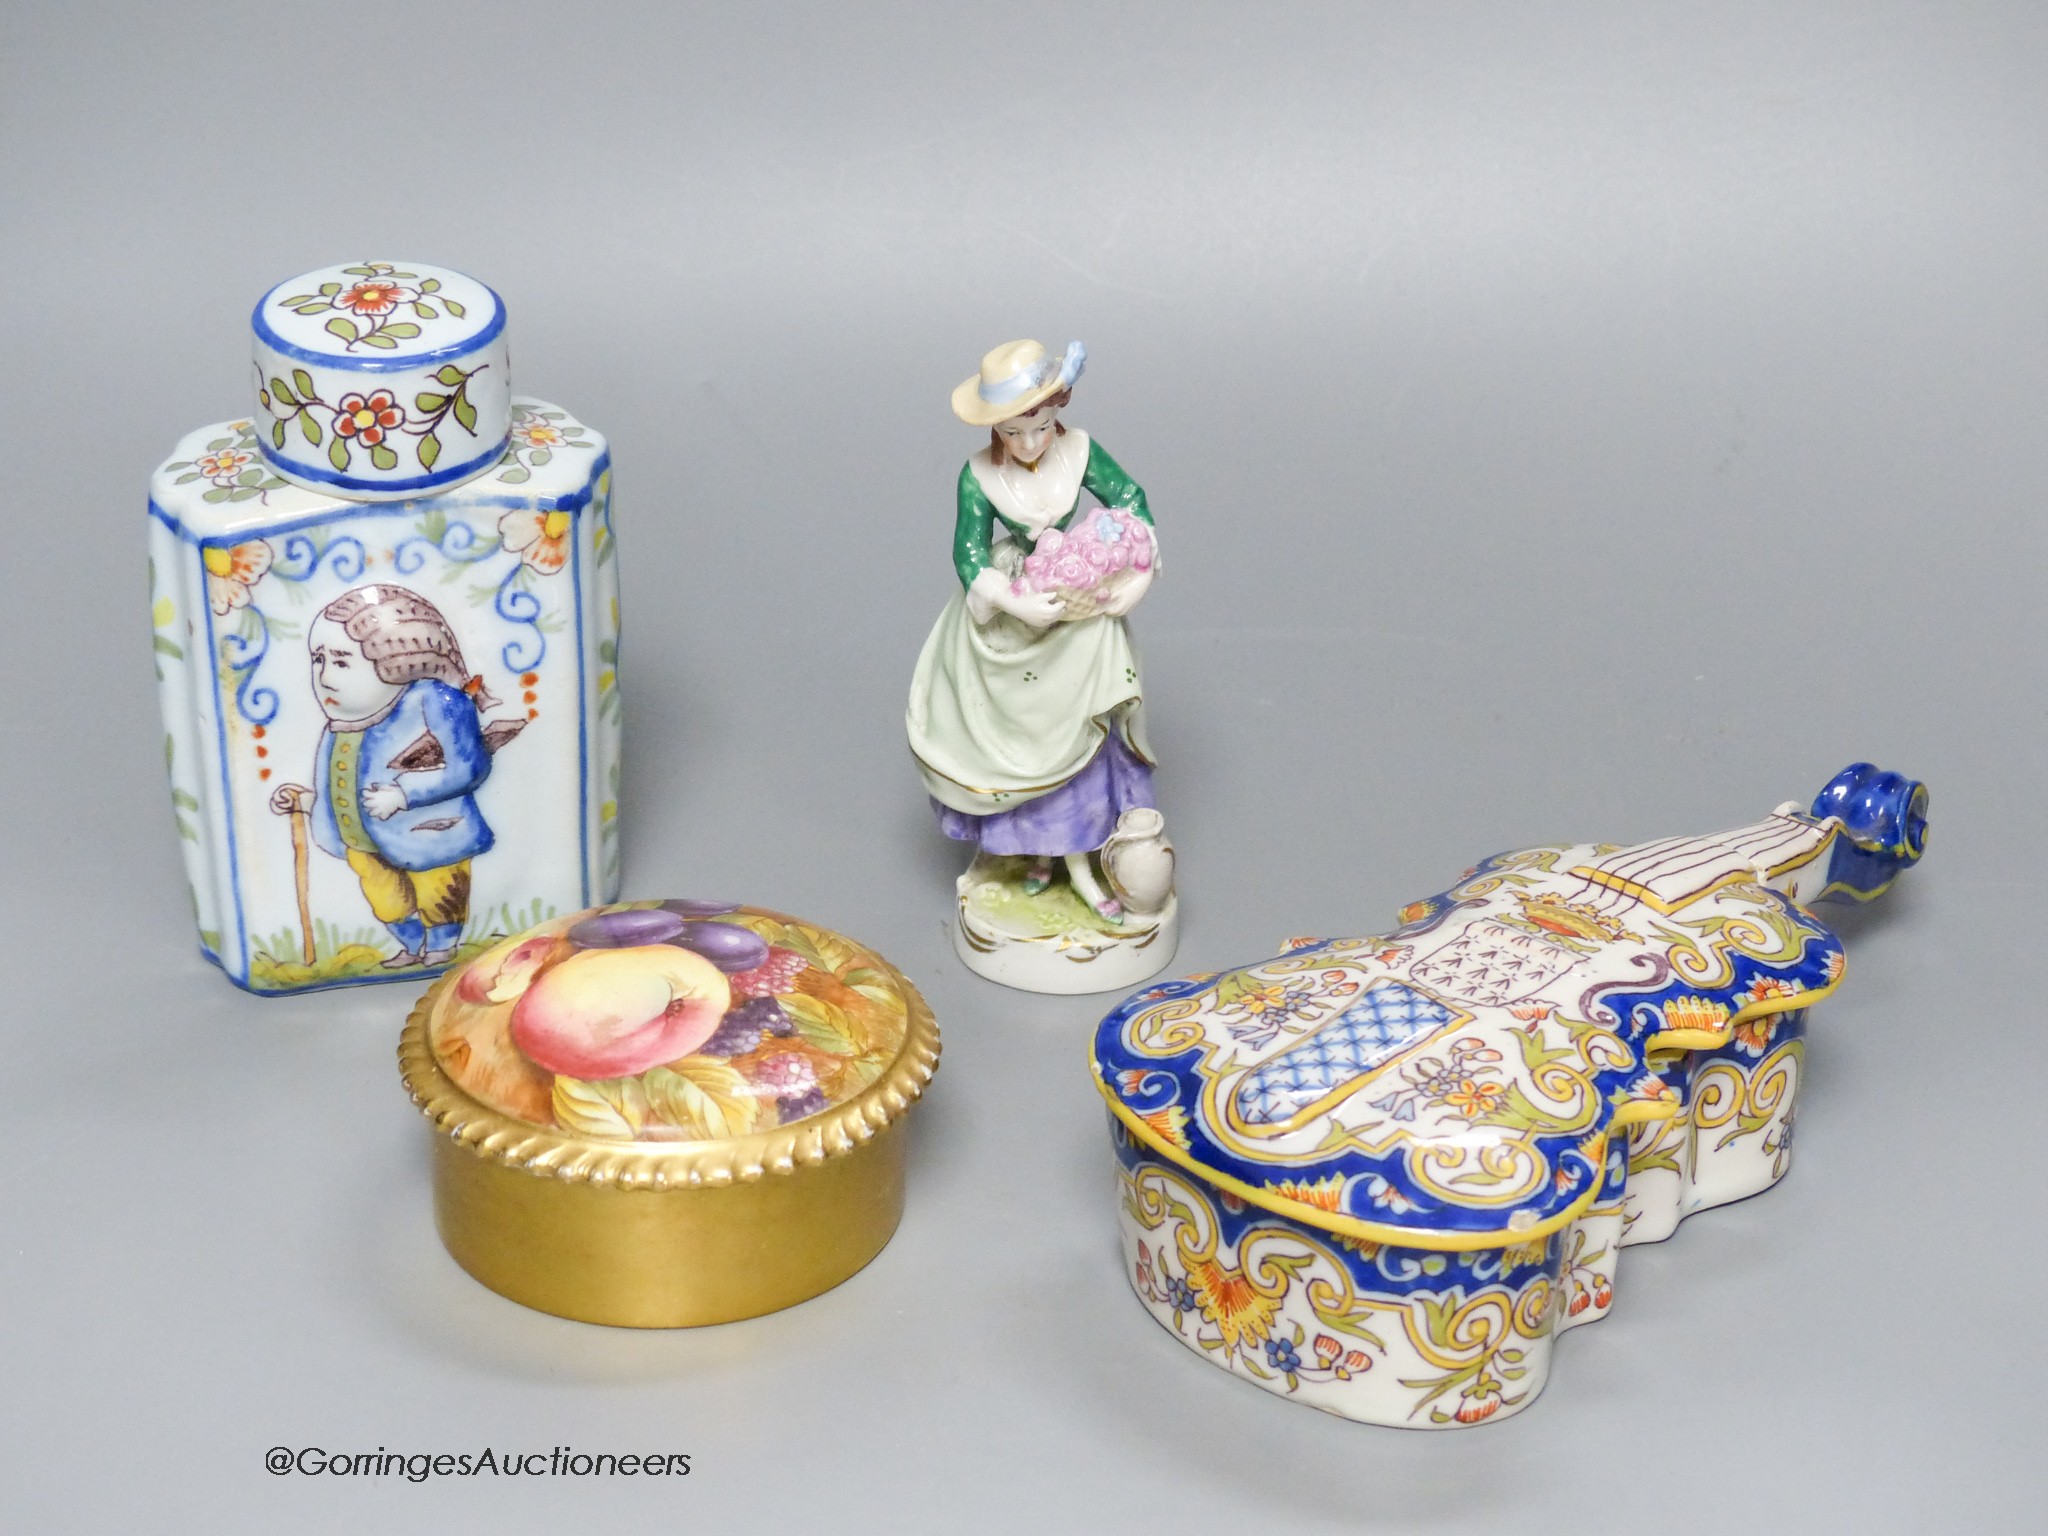 A French Faience tea caddy, casket, and other continental ceramics